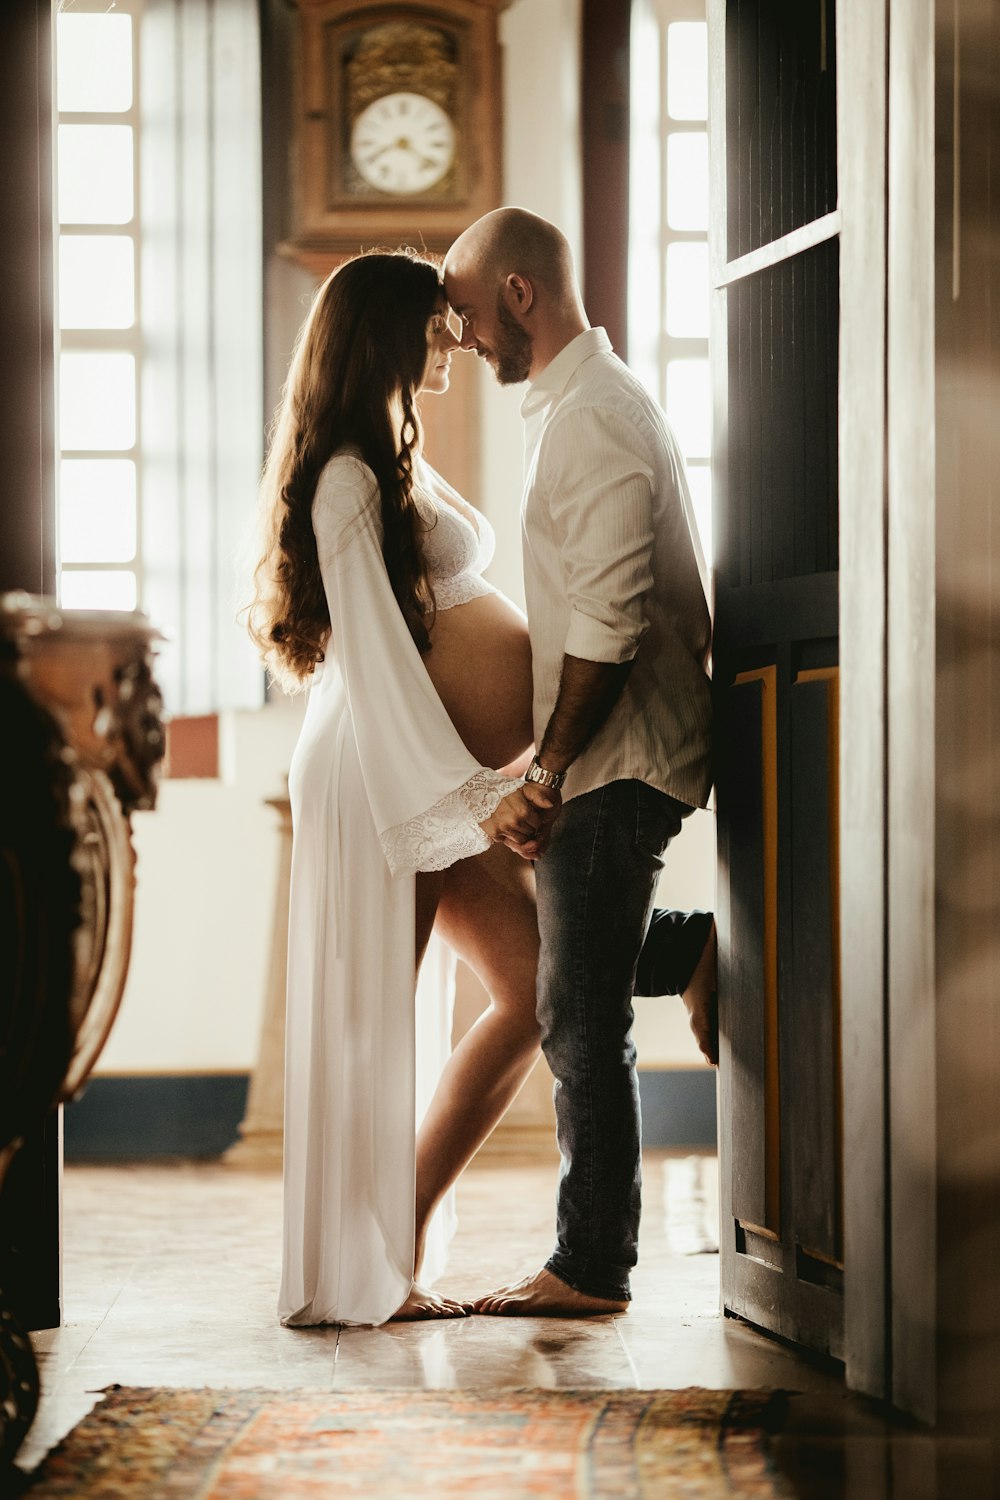 Maternity Shoot Pictures | Download Free Images on Unsplash